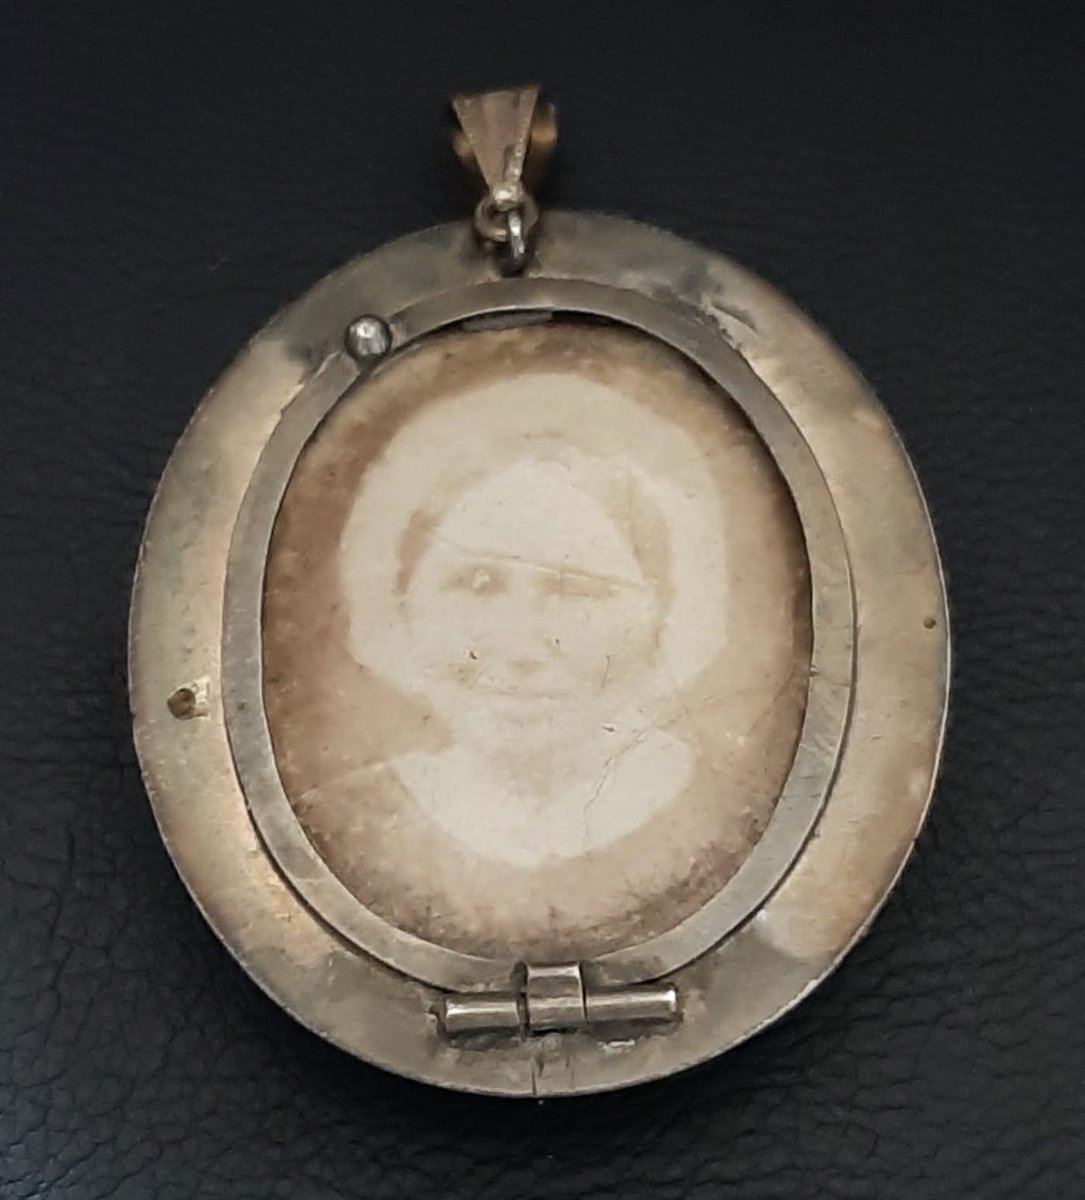 While I'm in an antiquarian mood, a question for #GermanHistory #socialhistory buffs:

This pendant, featuring a photo of my great-great grandmother (1834-1872) was made not long after she had died in childbirth. 1/n
#deutschegeschichte #sozialgeschichte